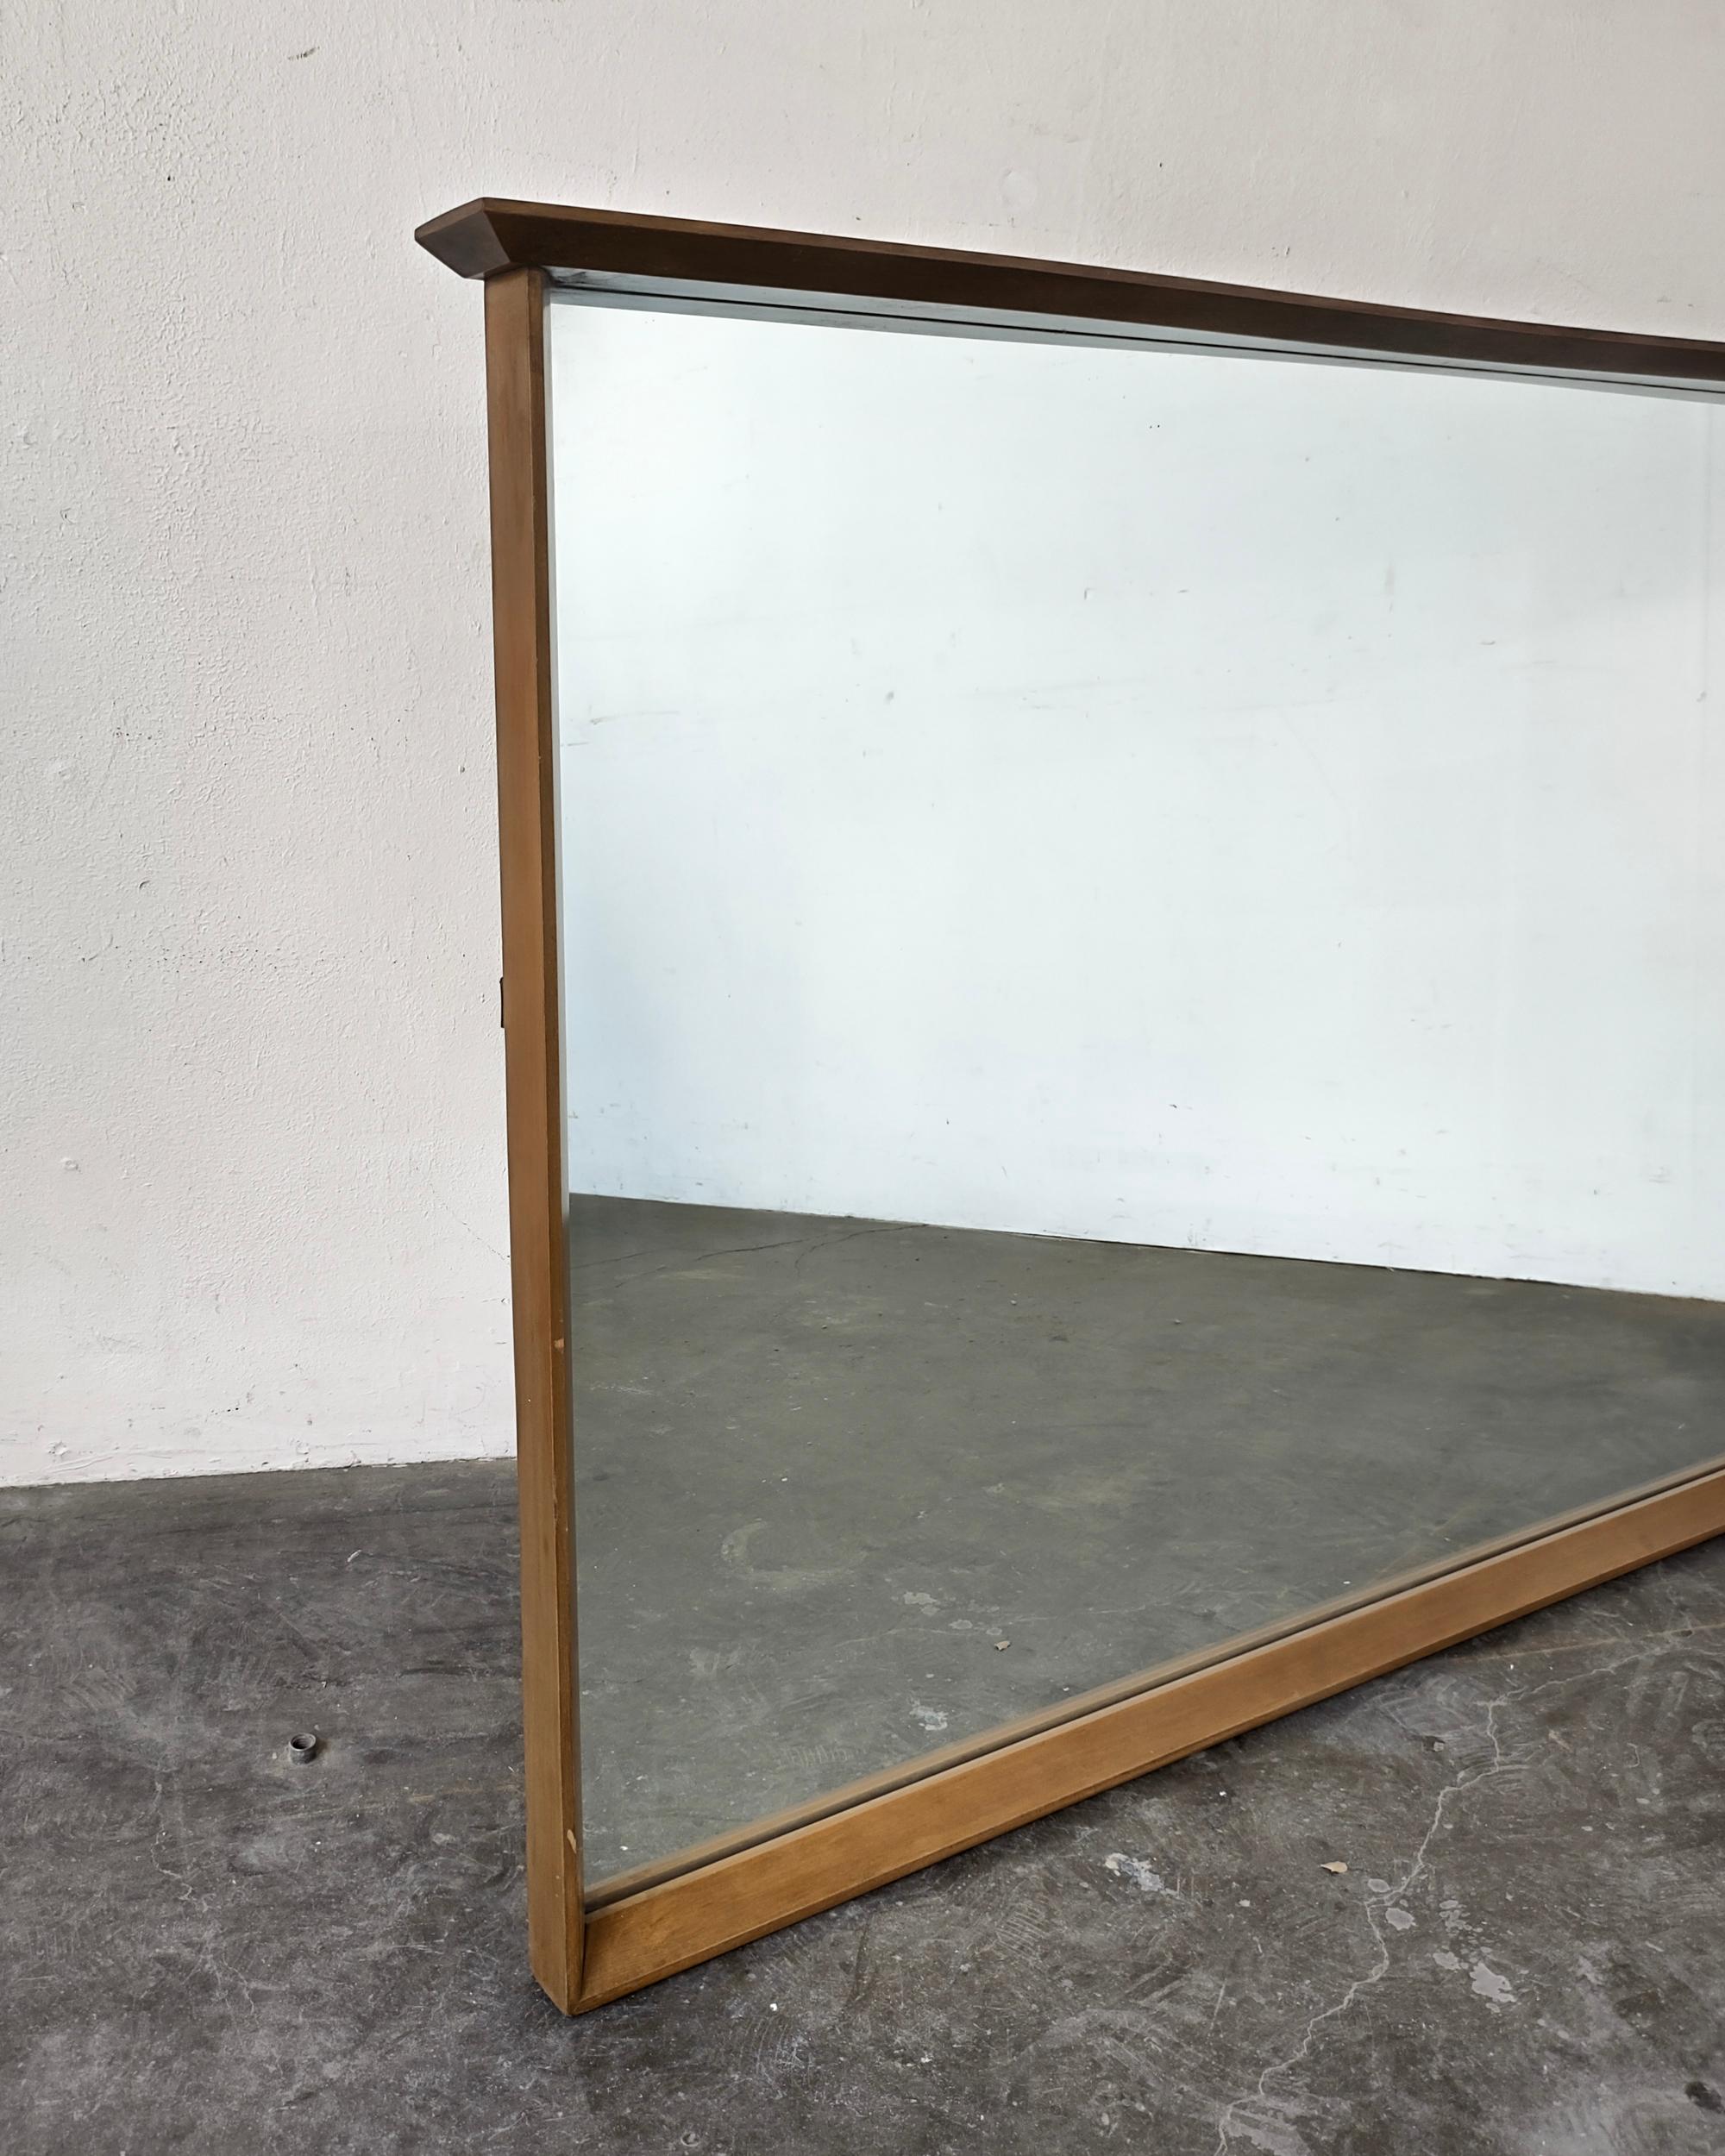 Large Mid-Century Modern horizontal mirror circa 1960s. Beveled wood frame with top edge detail. Hanging wire attached on back. Overall excellent vintage condition.

51.5